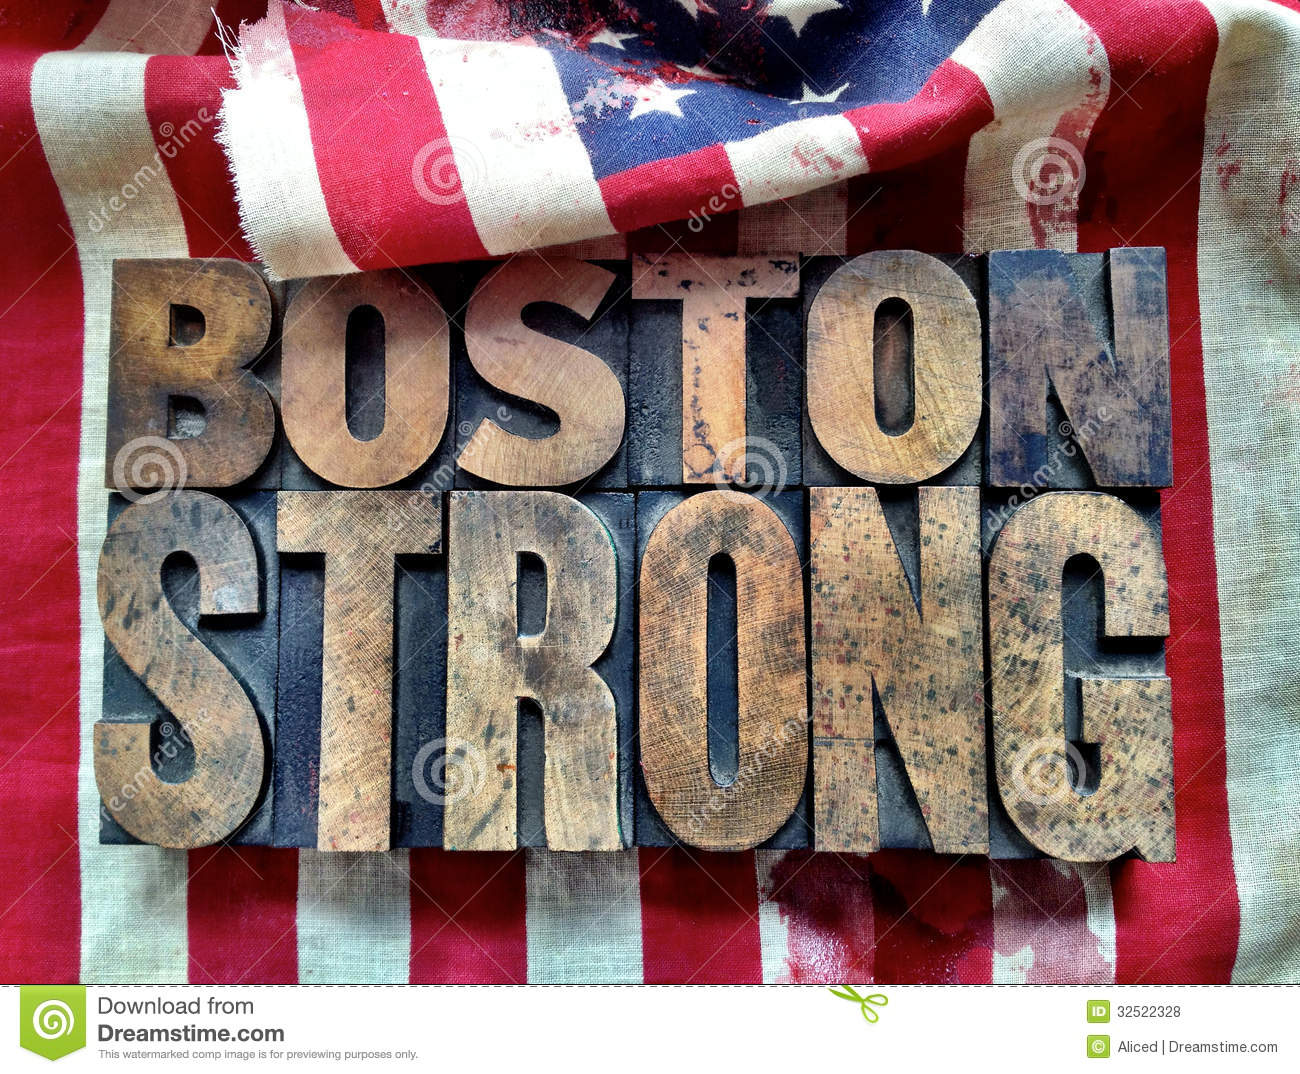 Boston Strong Words On Flag Royalty Free Stock Photos   Image